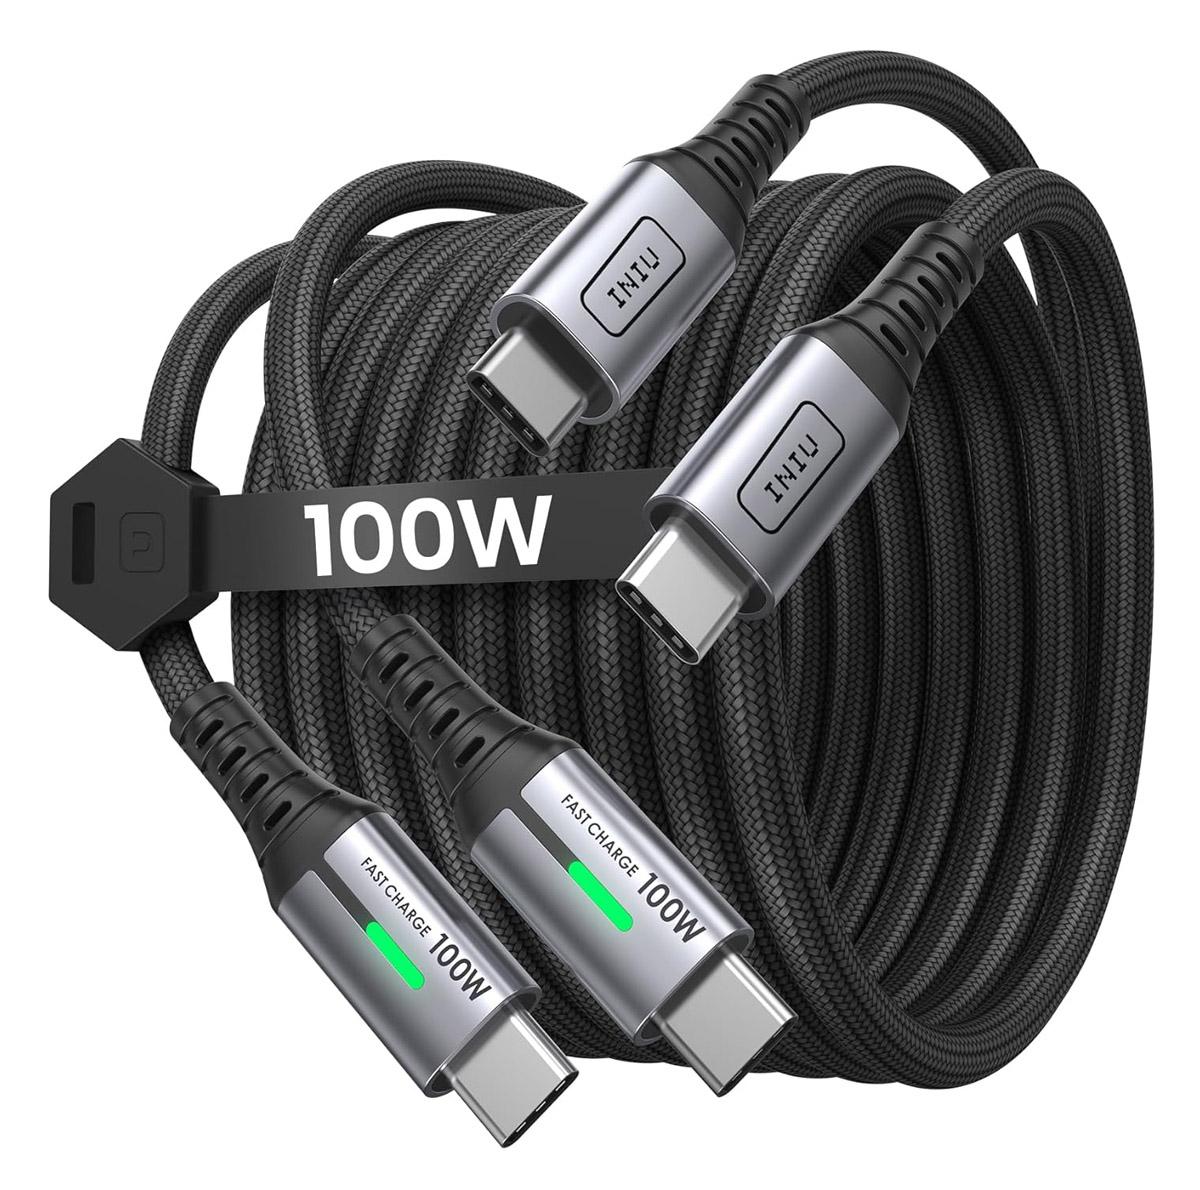 USB-C 6-feet 100w Cables by Iniu 2 Pack for $3.46